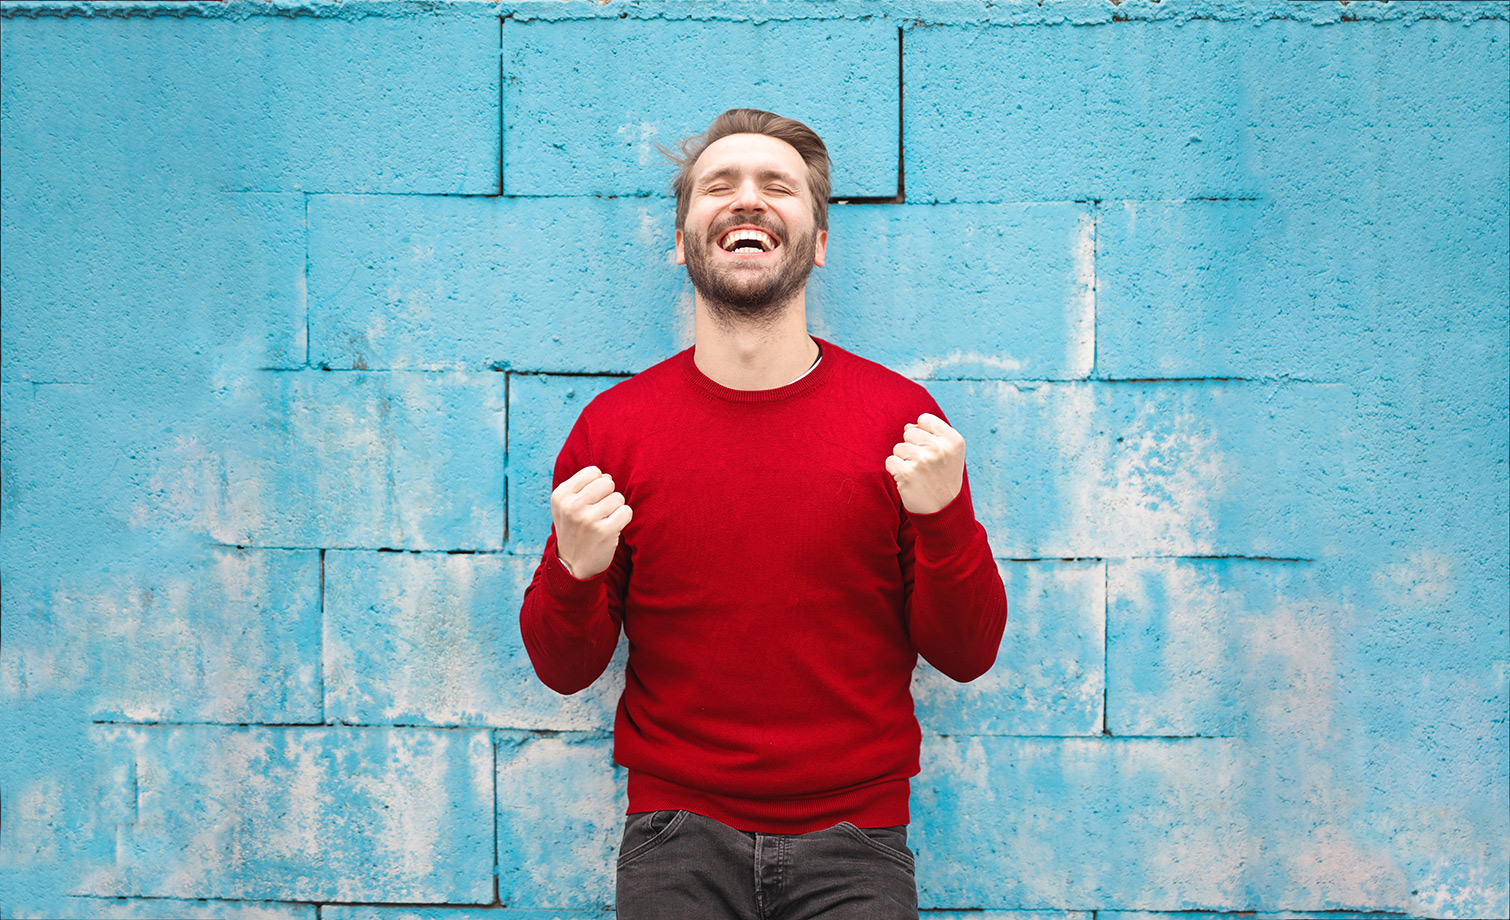 happy man rejoicing wearing red shirt standing in front of blue wall